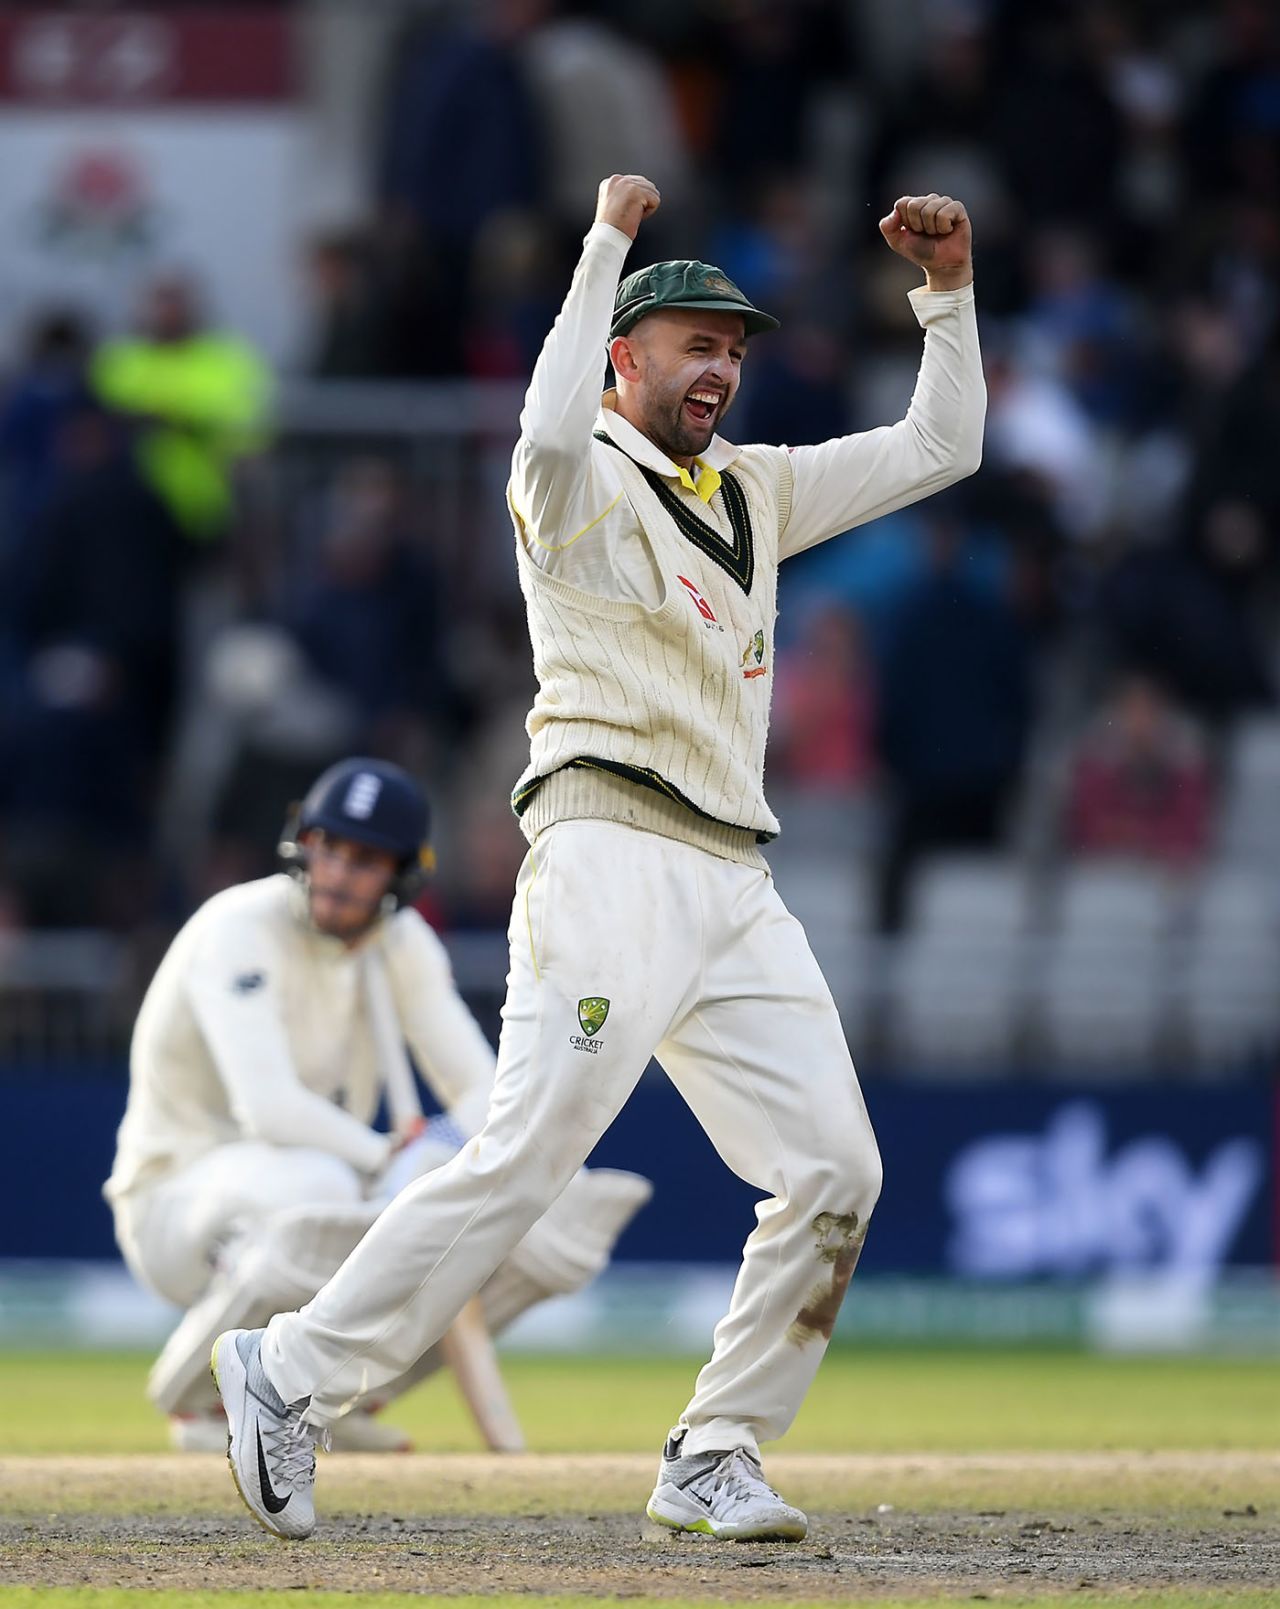 Nathan Lyon celebrates the final wicket of Craig Overton, Old Trafford, September 8, 2019